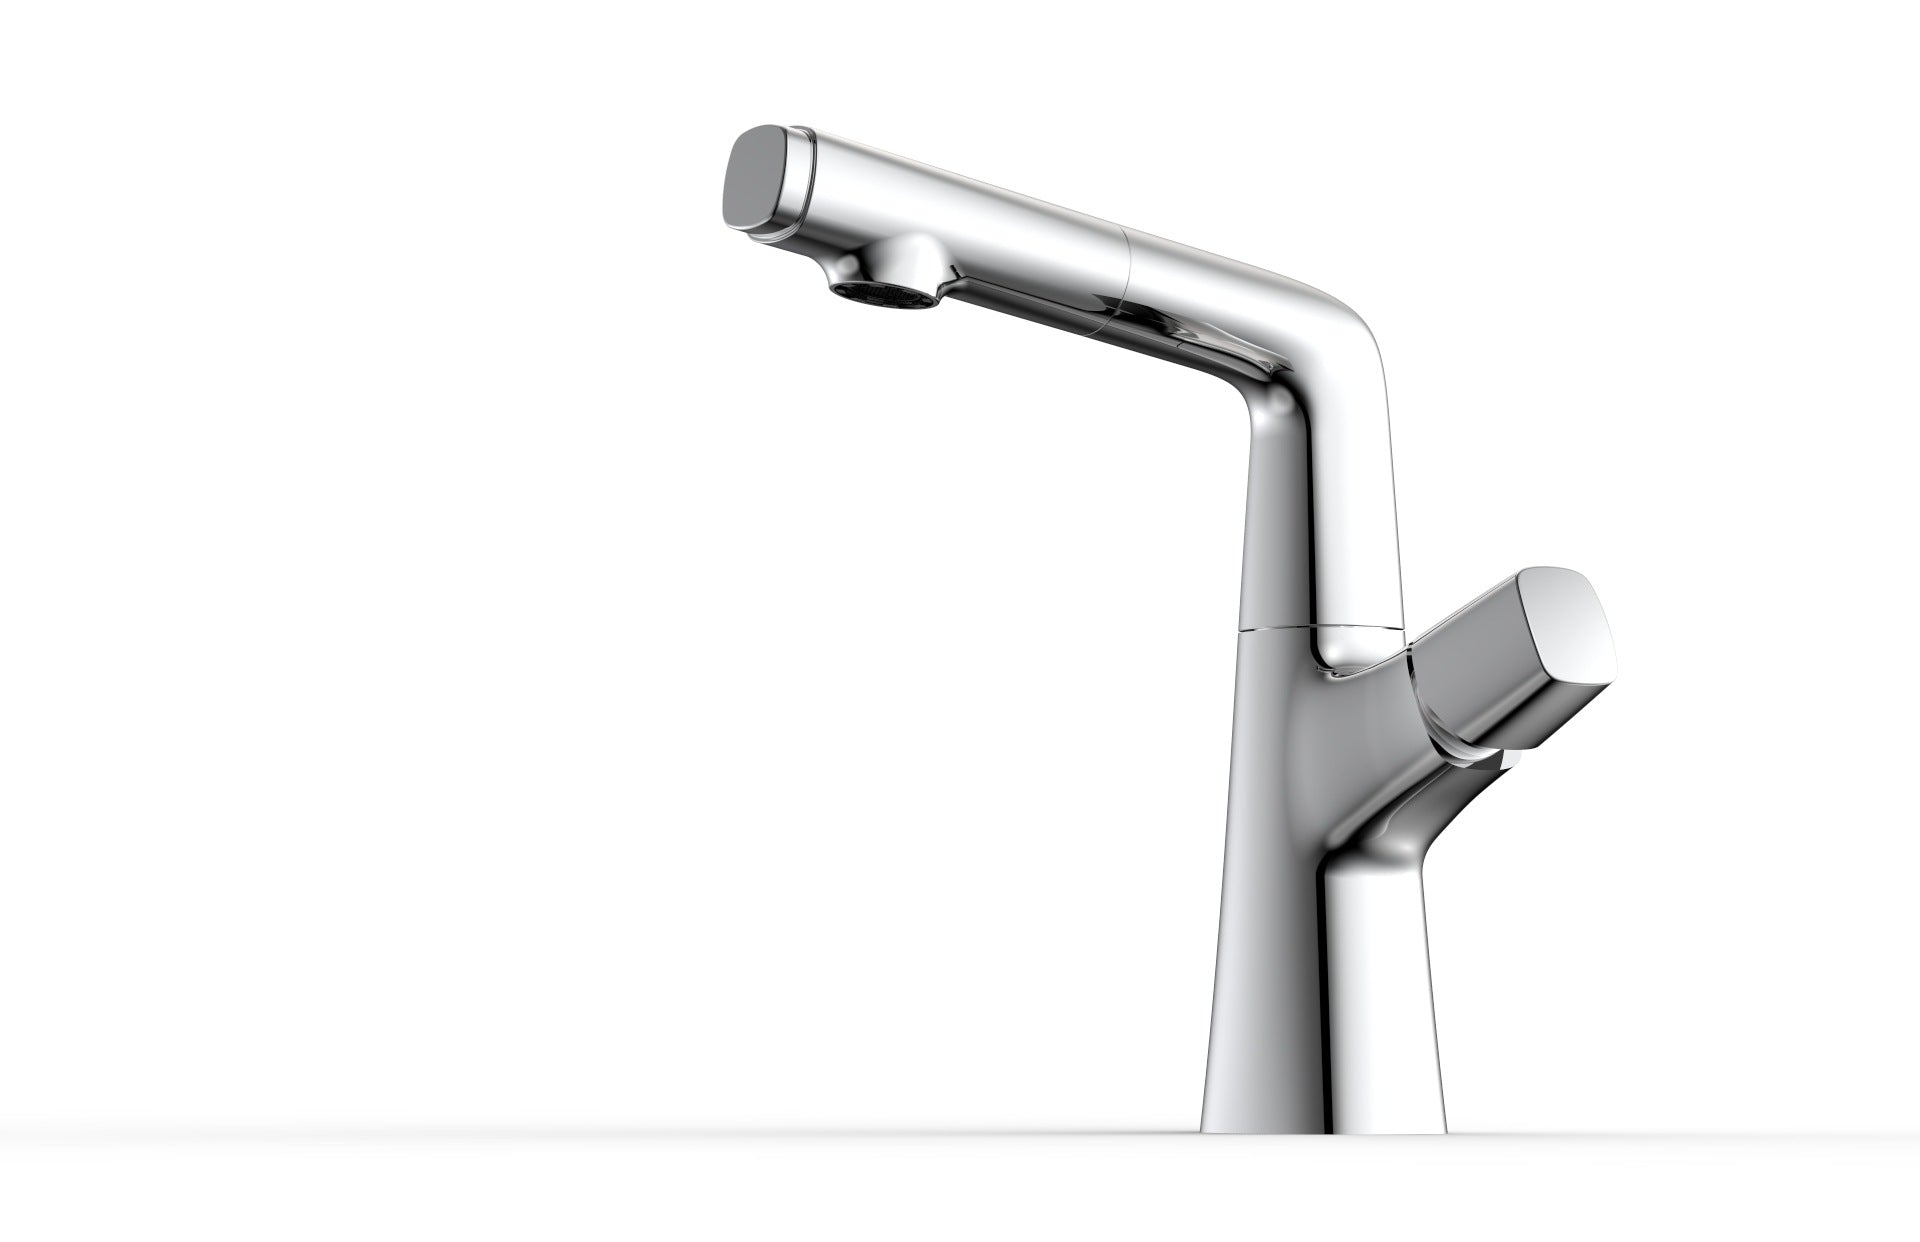 Full Brass Hot and Cold Water Lifting and Pull-Out Bathroom Faucet